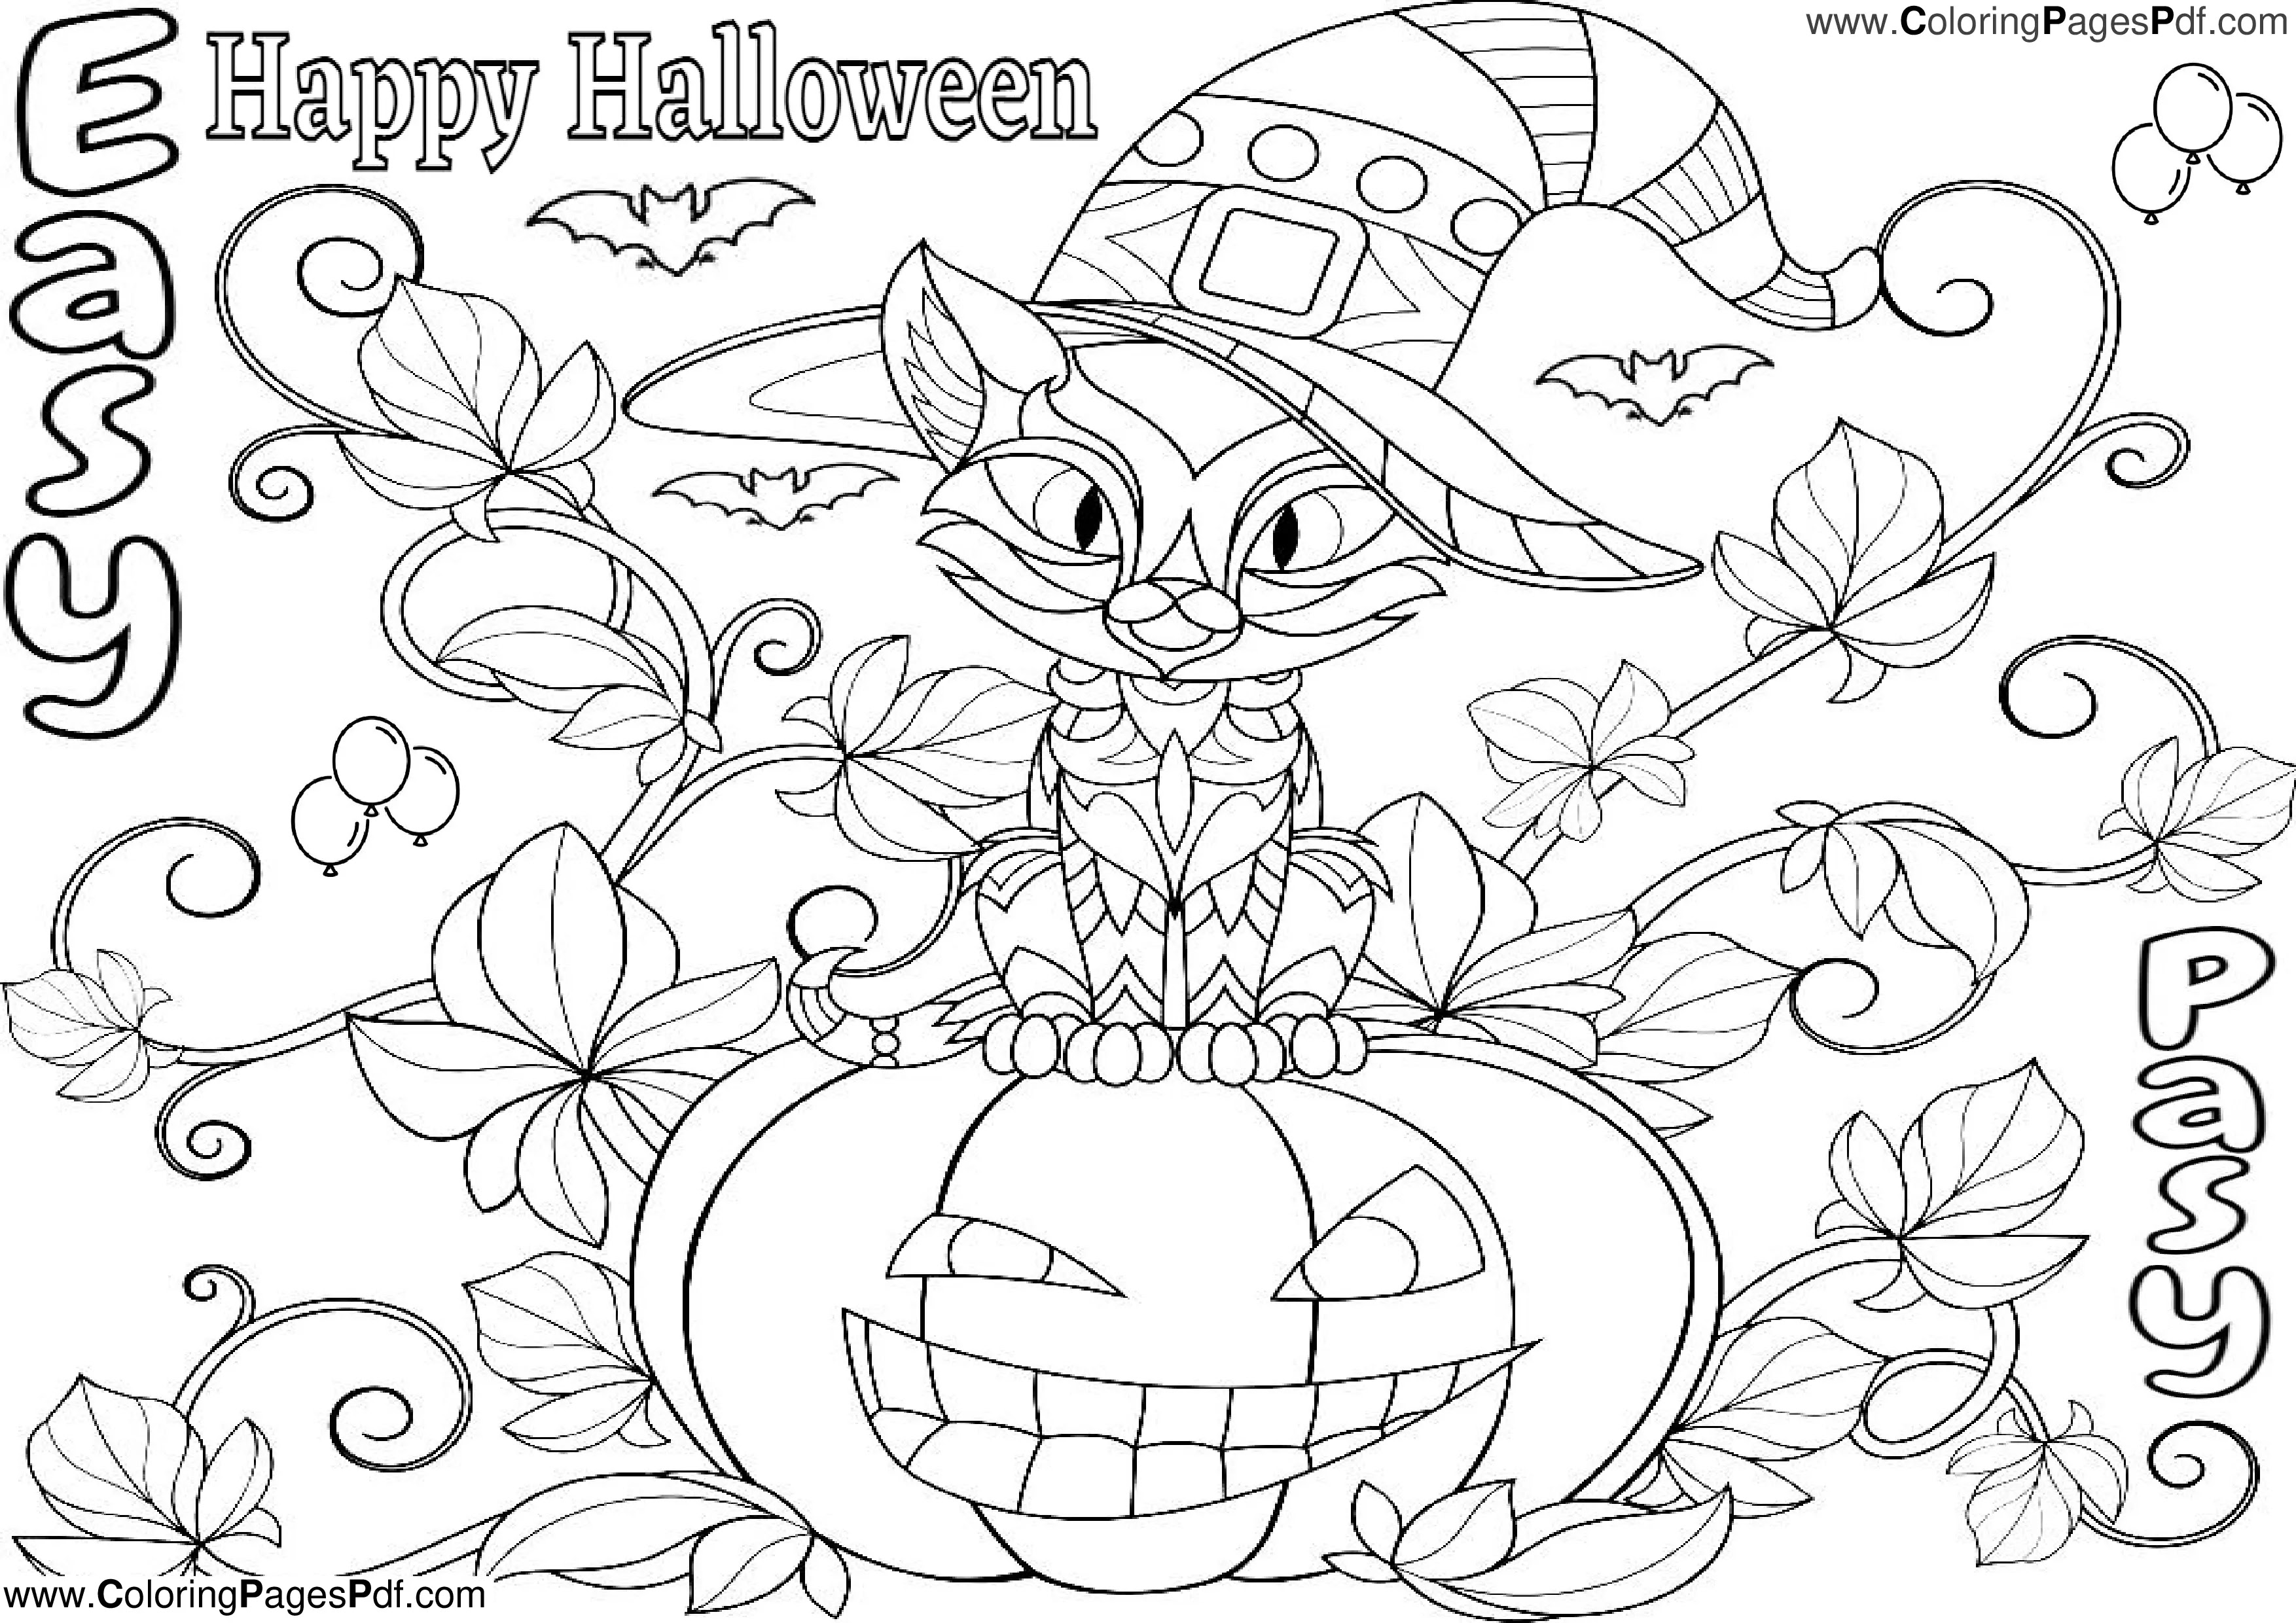 Cute Halloween coloring pages